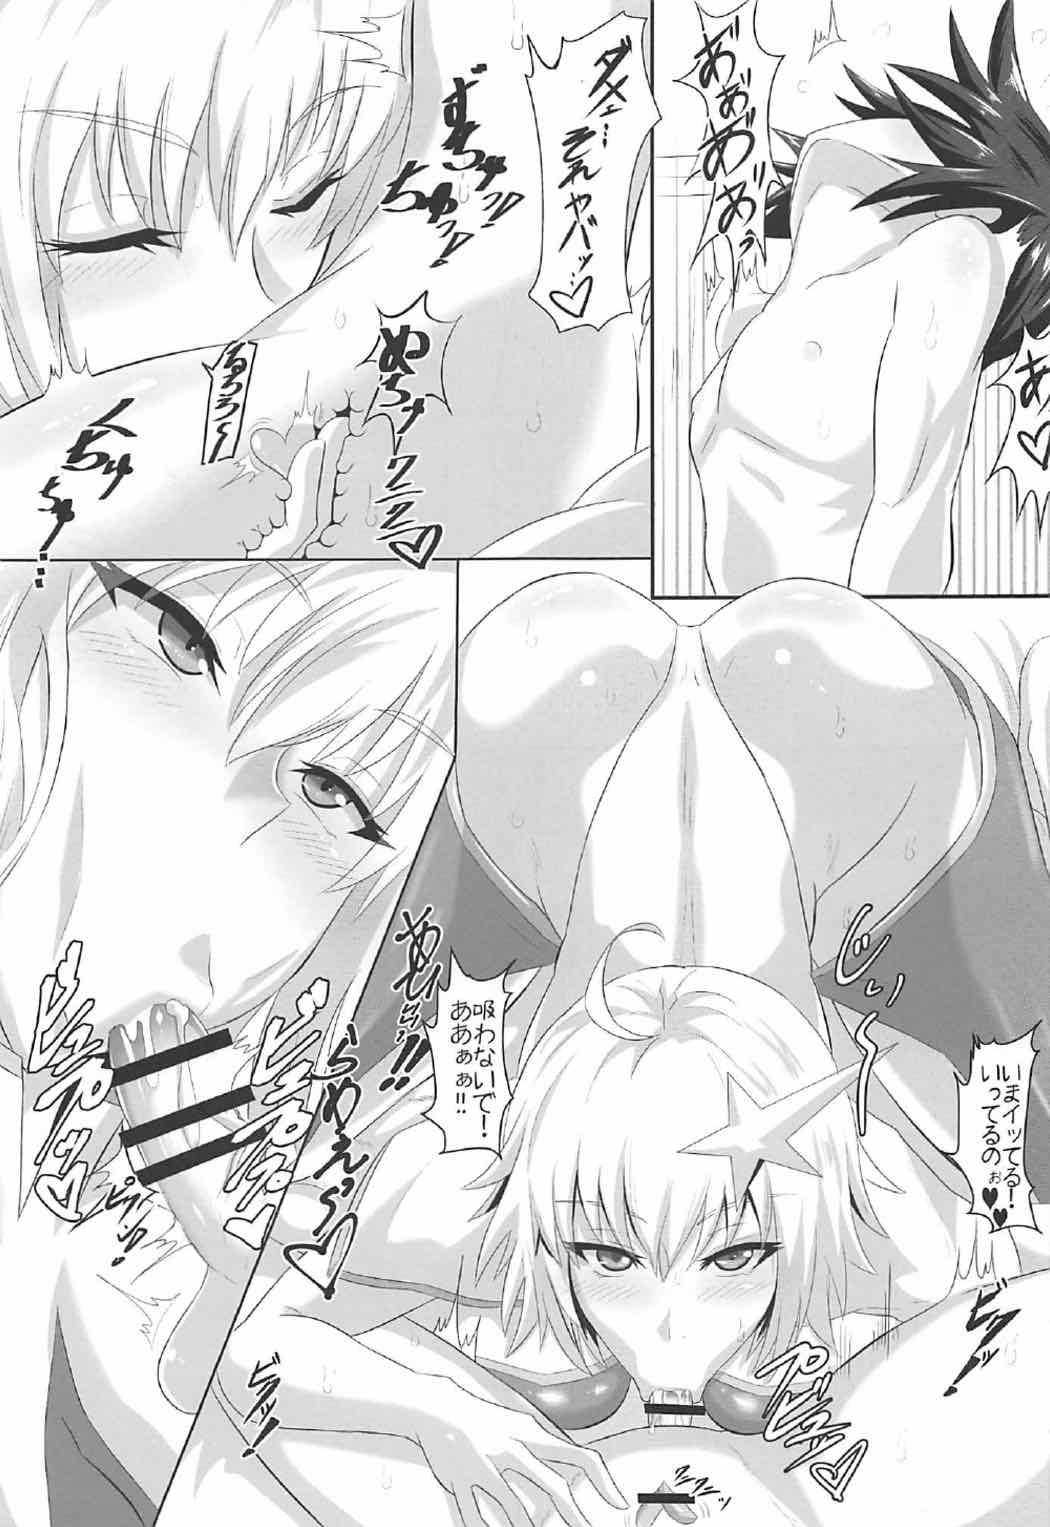 Chat Gehenna 6 - Fate grand order Man - Page 8